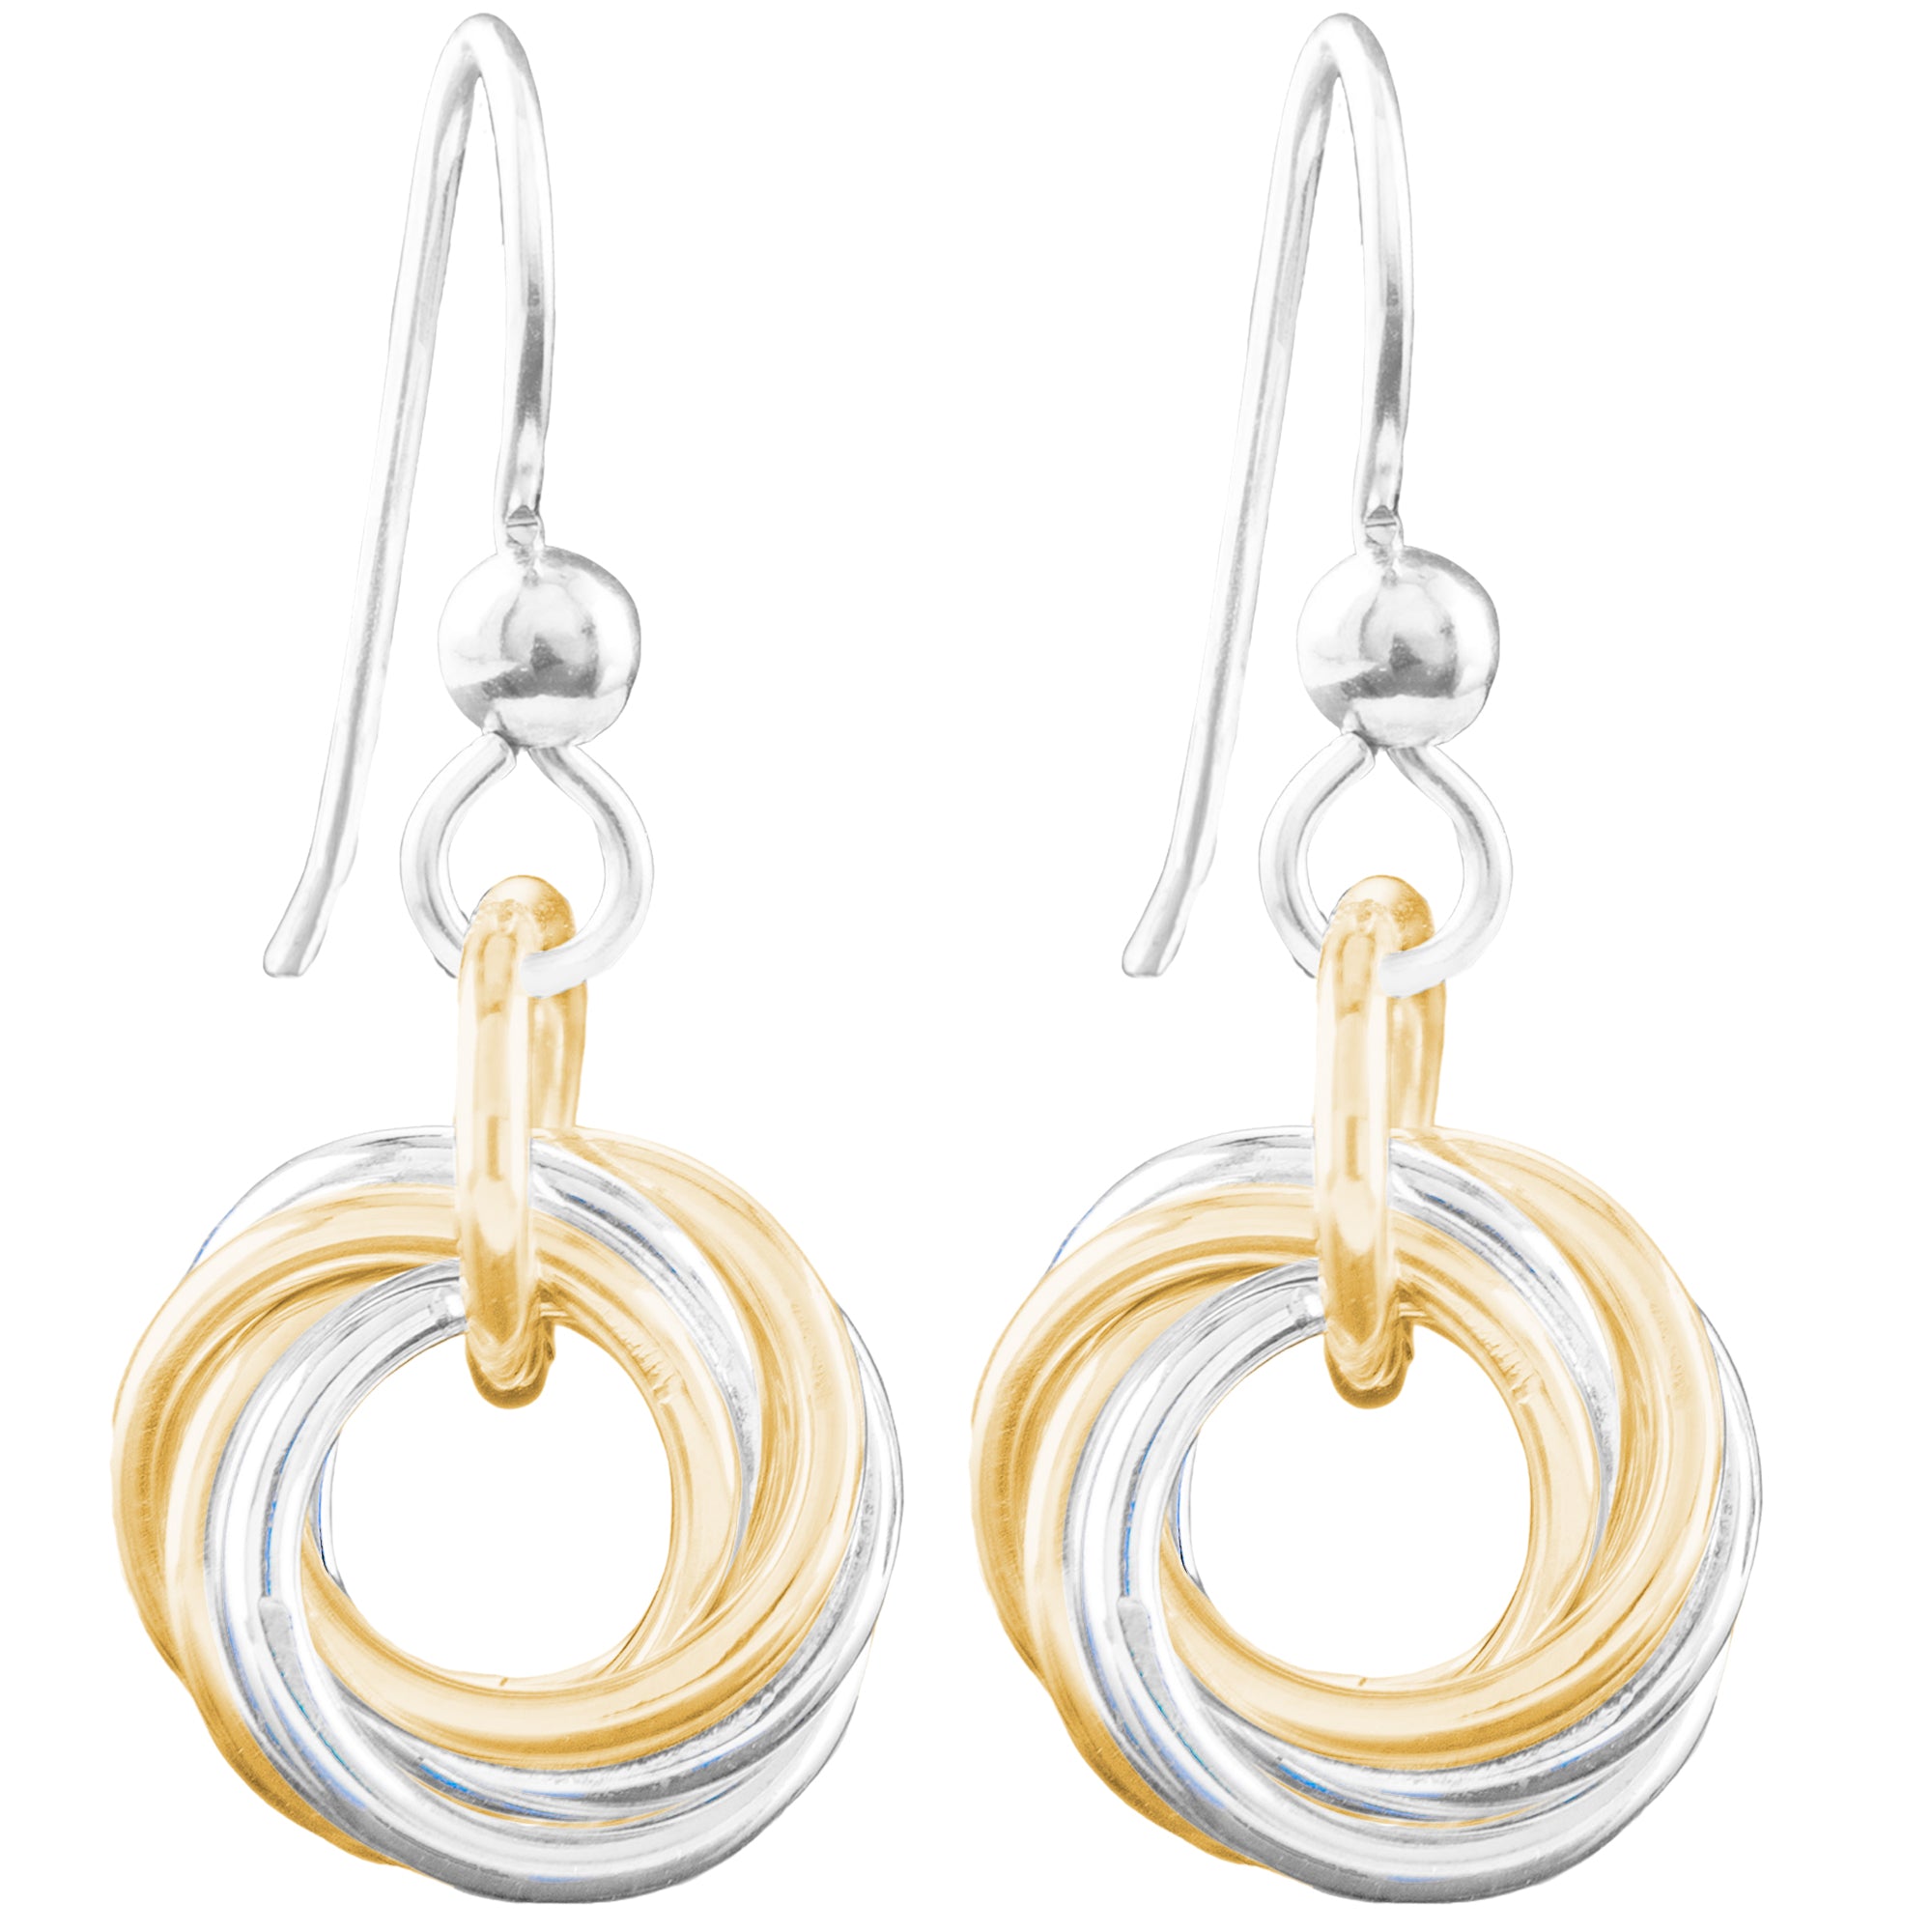 Two Tone Dainty Round Love Knot Dangle Earrings in Sterling Silver and 14K Yellow Gold Fill